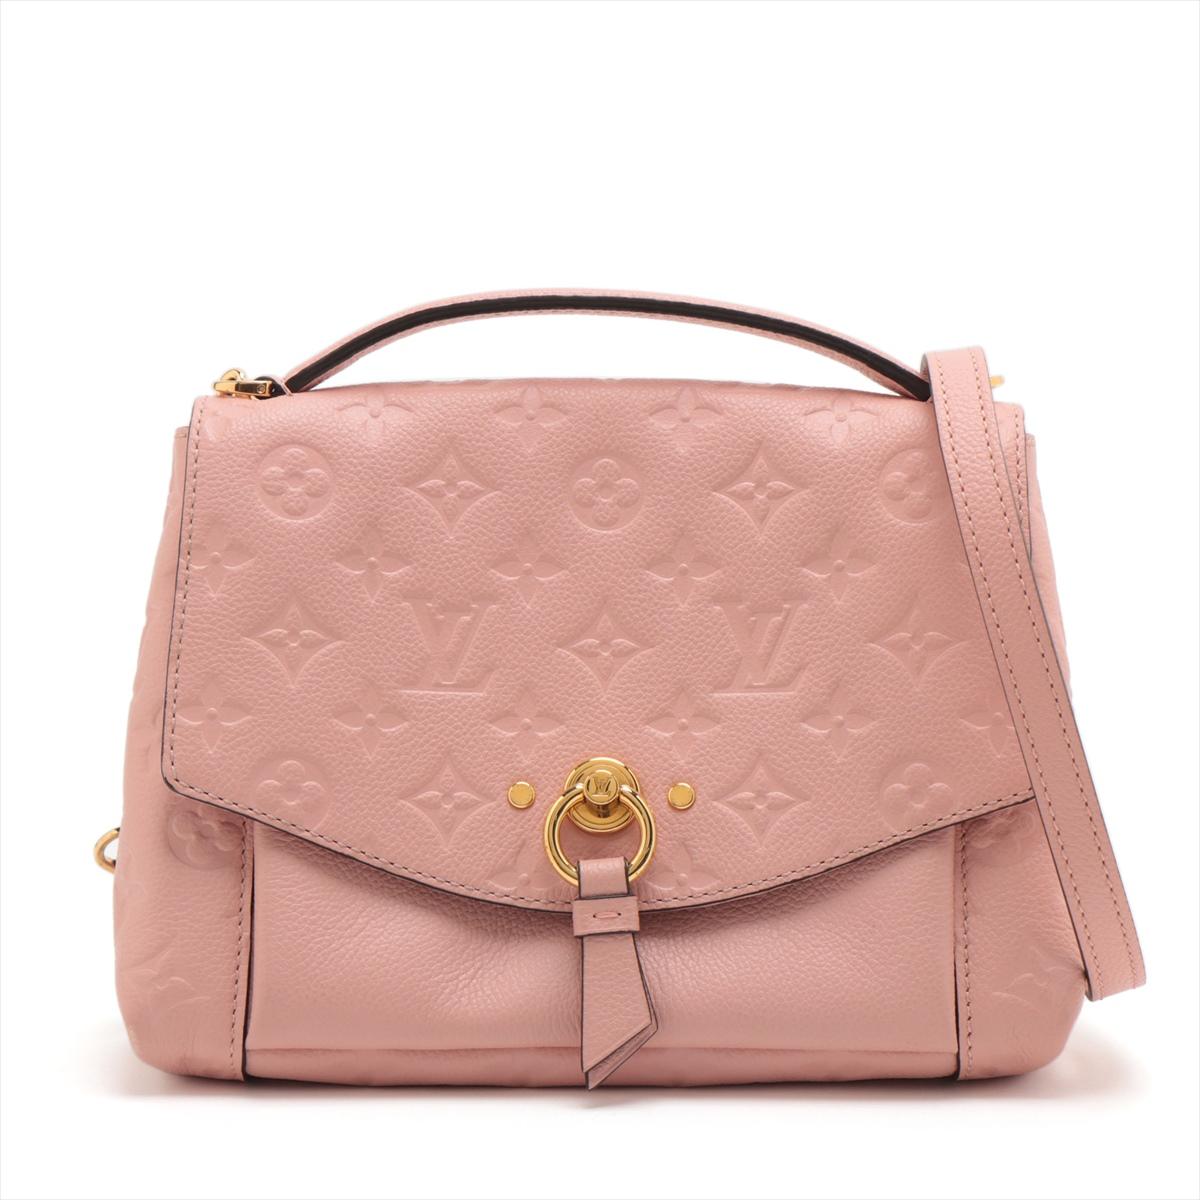 The Louis Vuitton Monogram Empreinte Blanche BB is a luxurious and sophisticated handbag that showcases the brand's iconic Monogram Empreinte leather, known for its supple texture and embossed monogram pattern. Meticulously crafted, the BB (Baby)